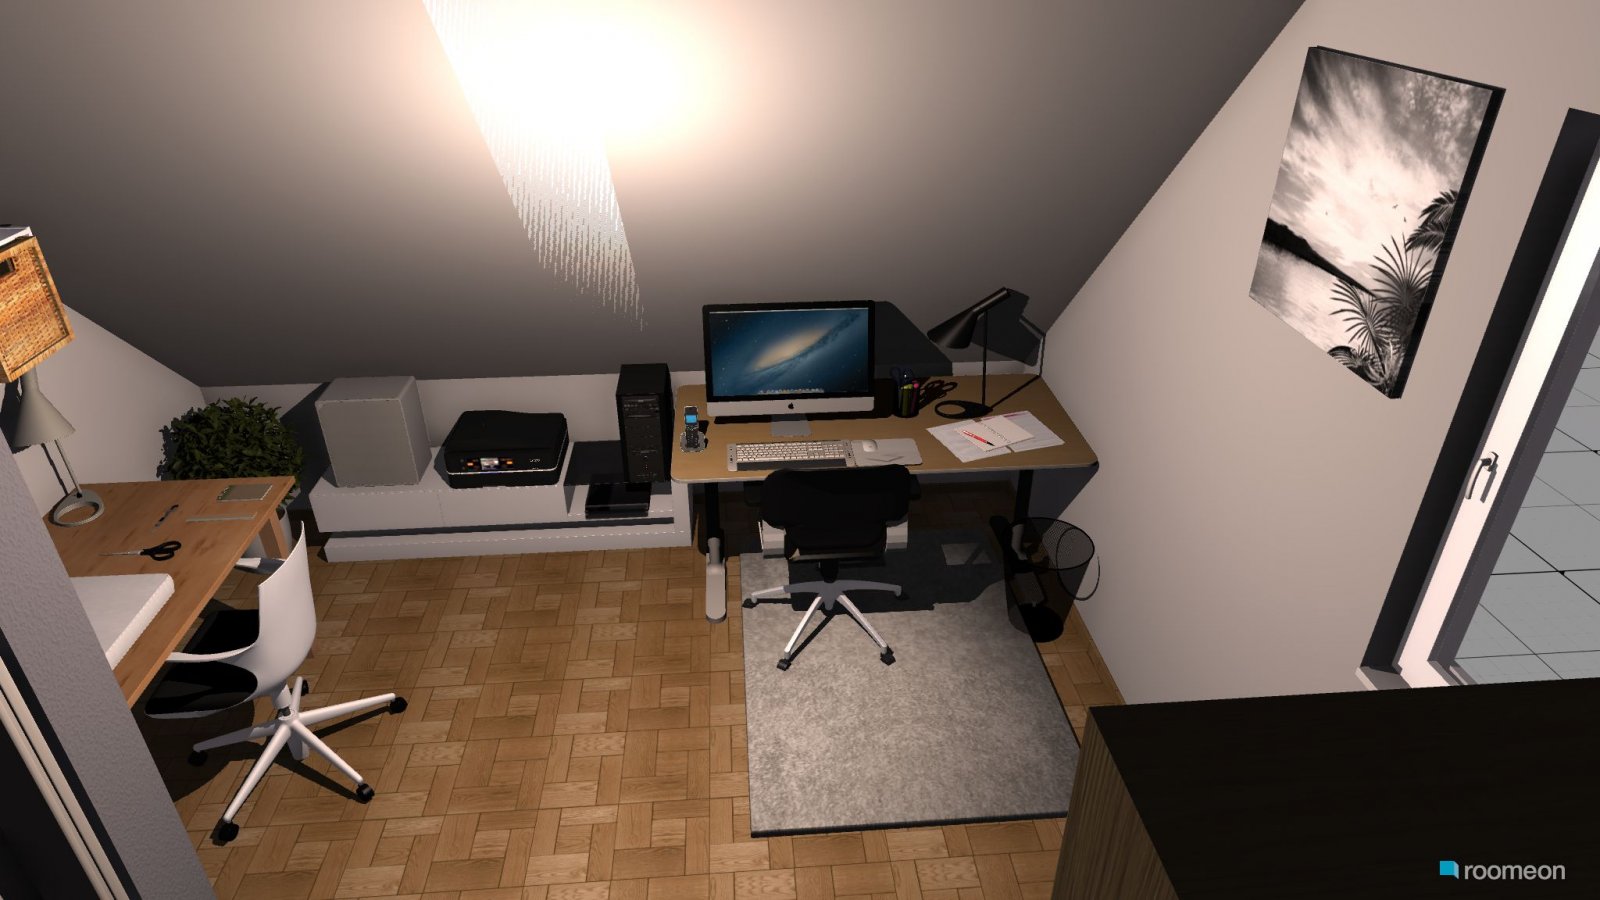 Room Design gaming zimmer turbenthal - roomeon Community